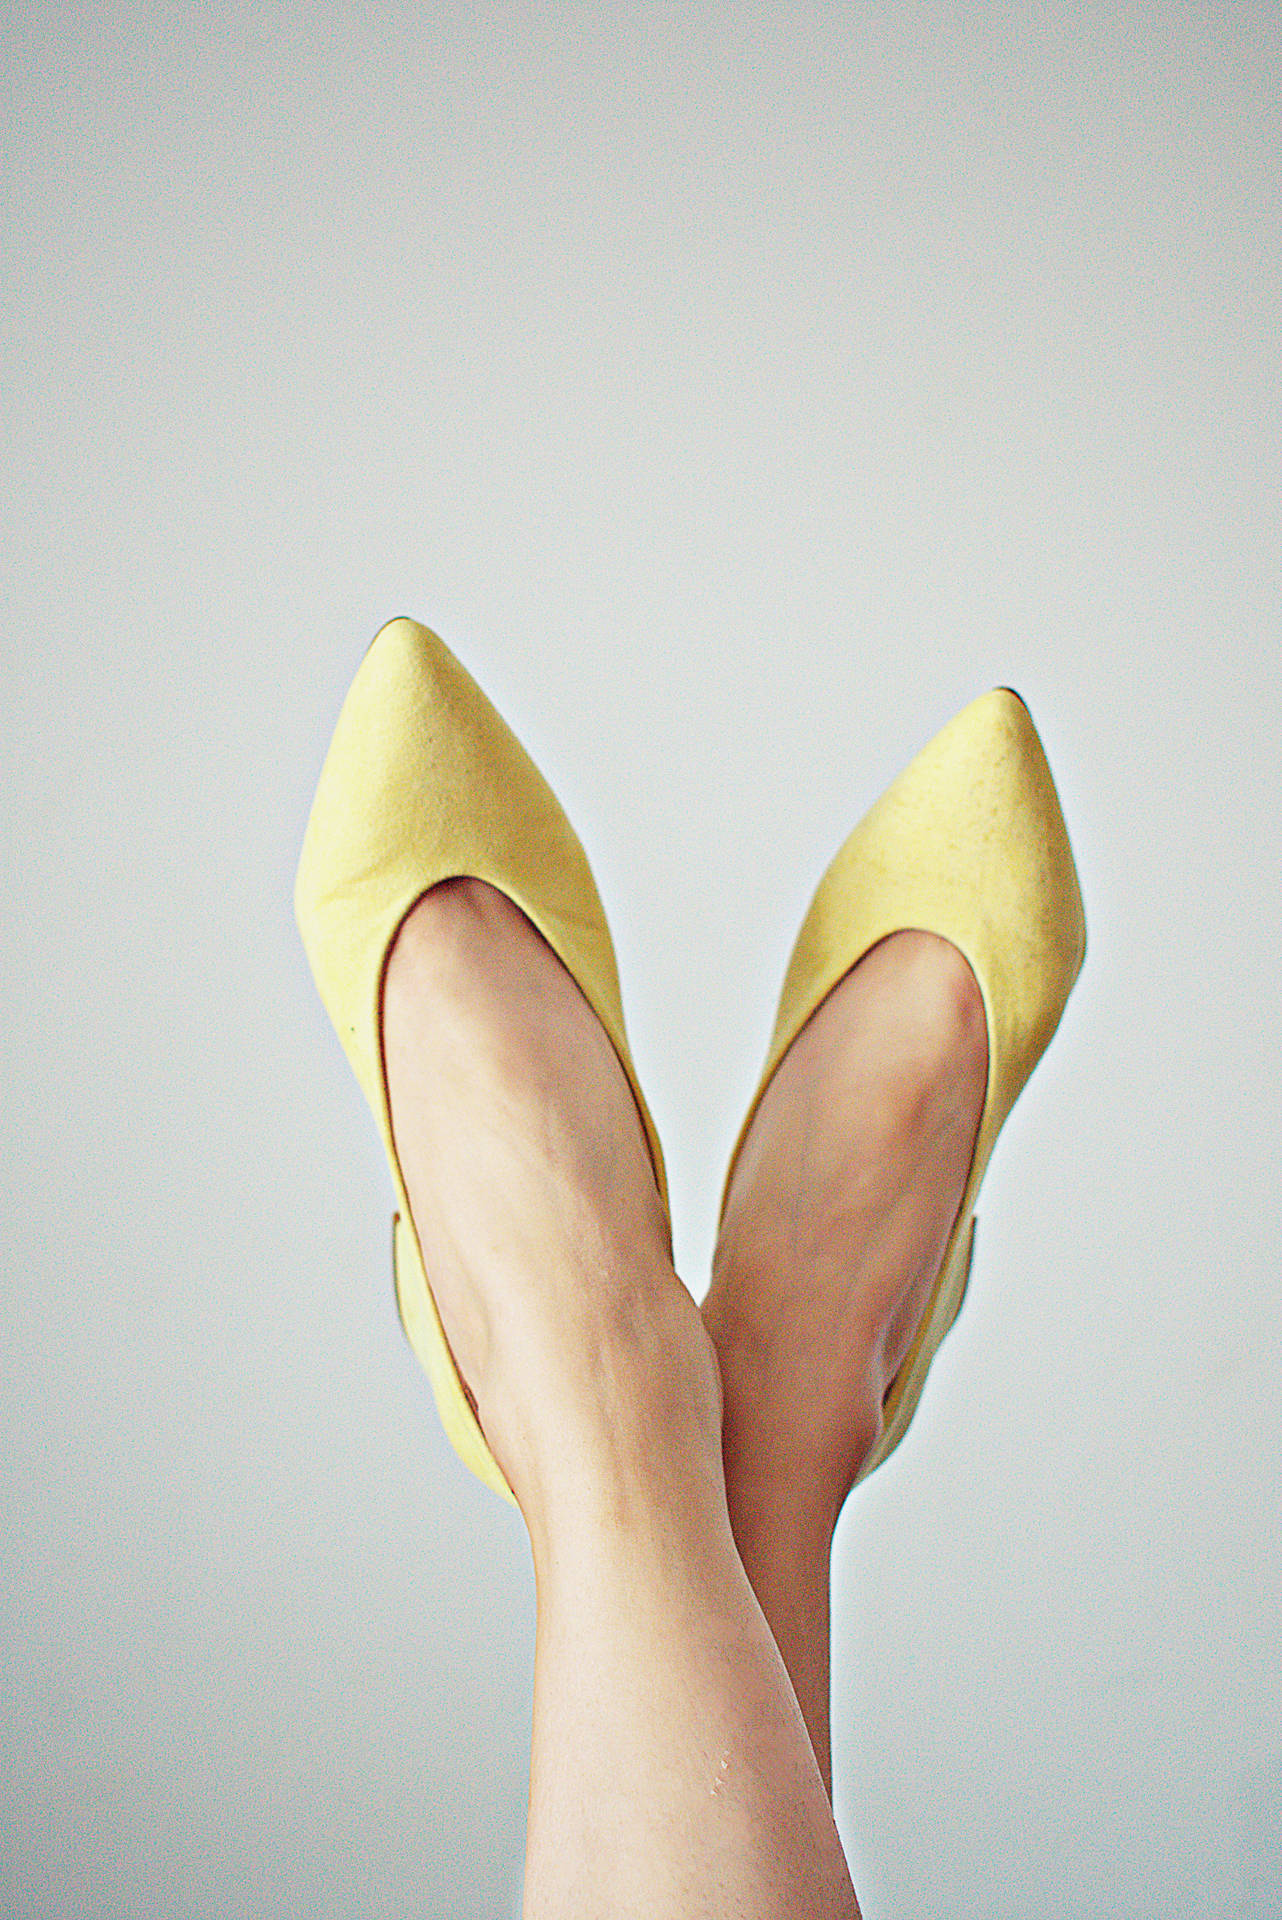 Trendy feet in bright yellow shoes Wallpaper